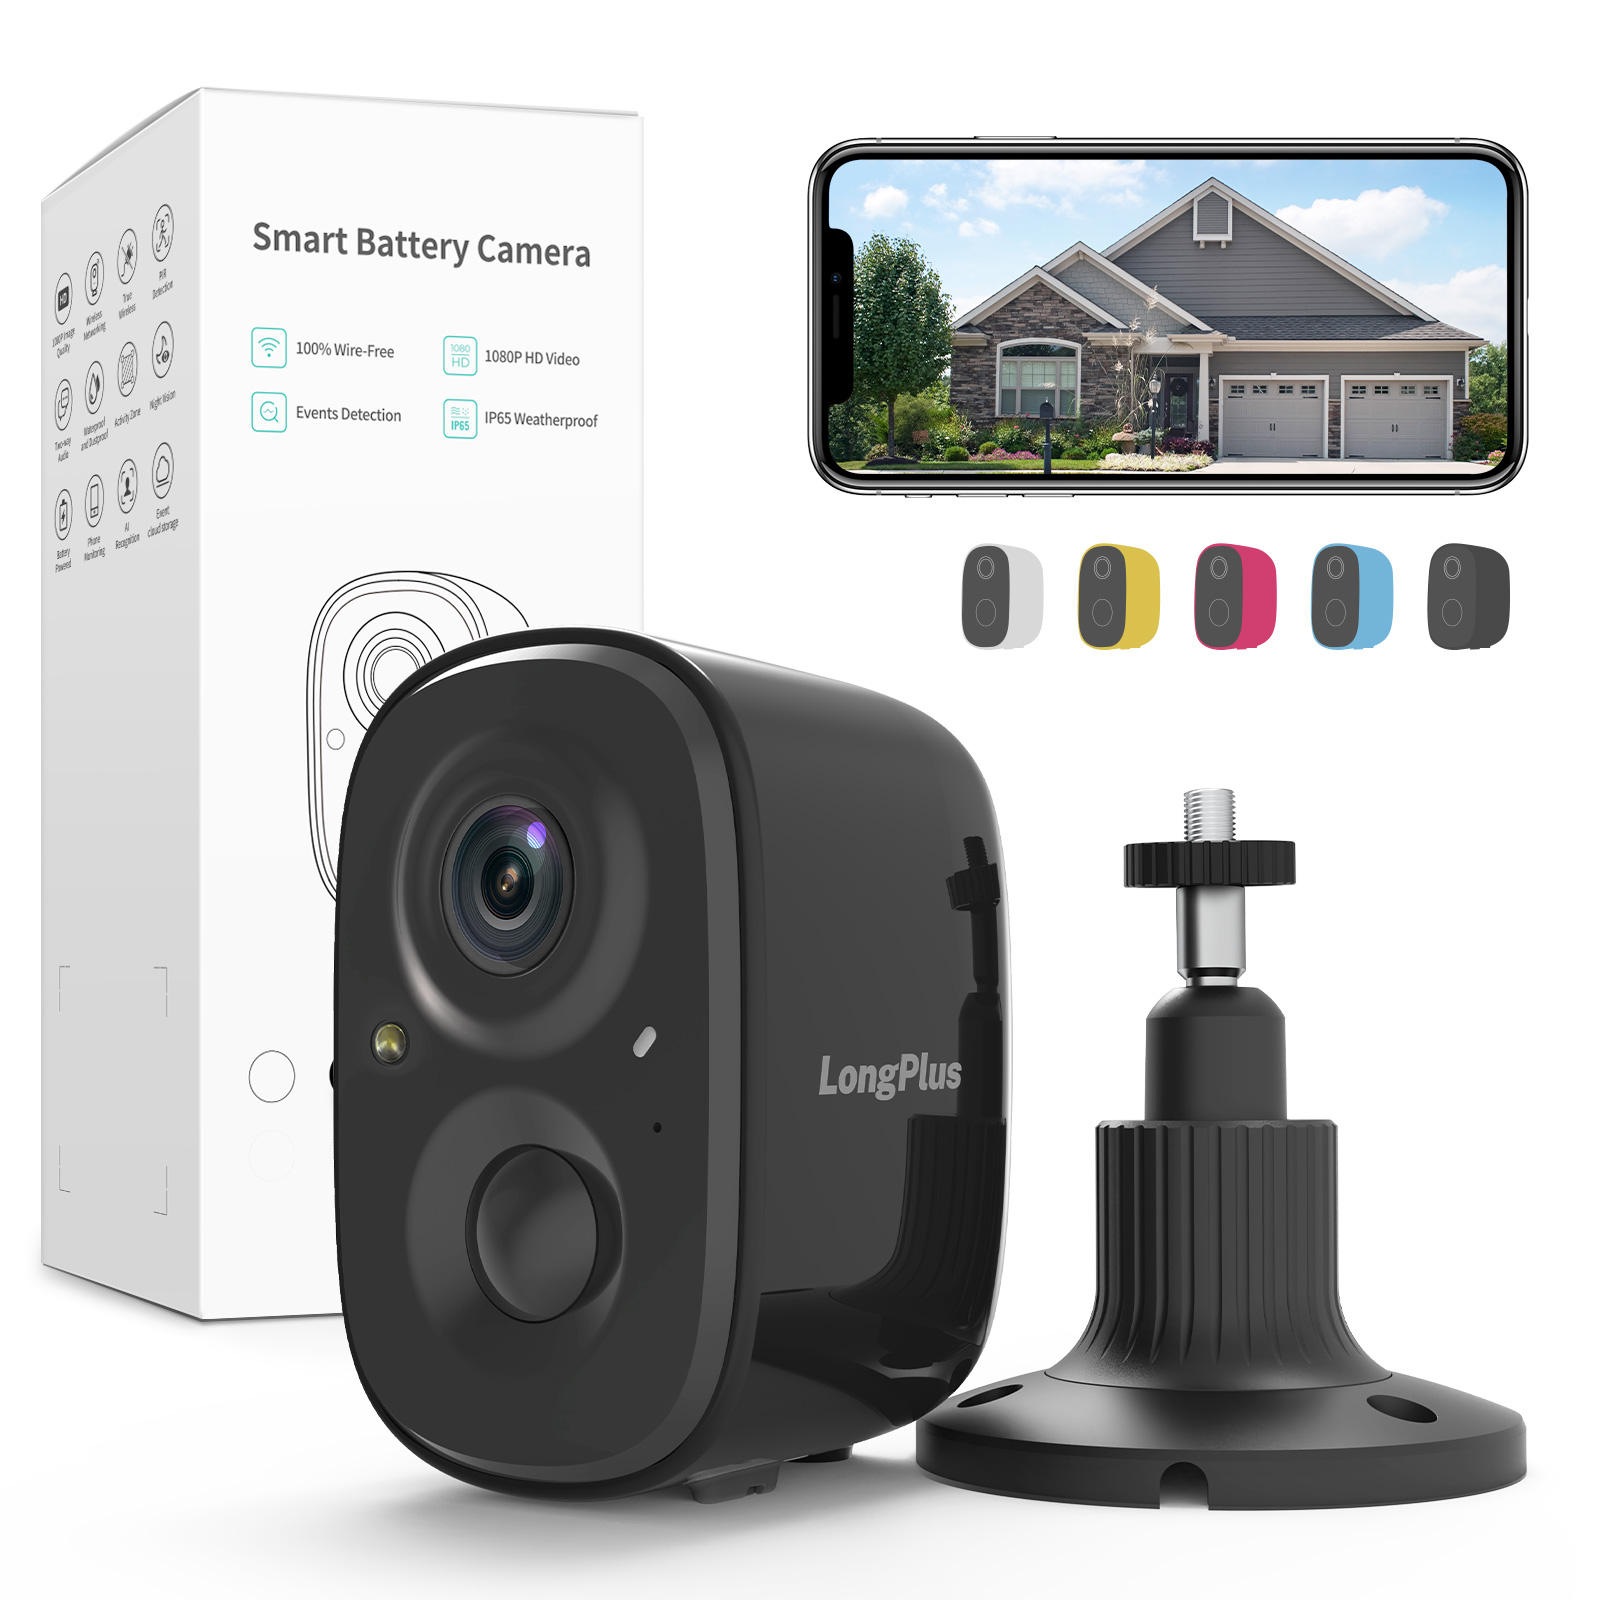 LongPlus X83 wireless cameras for home security-1